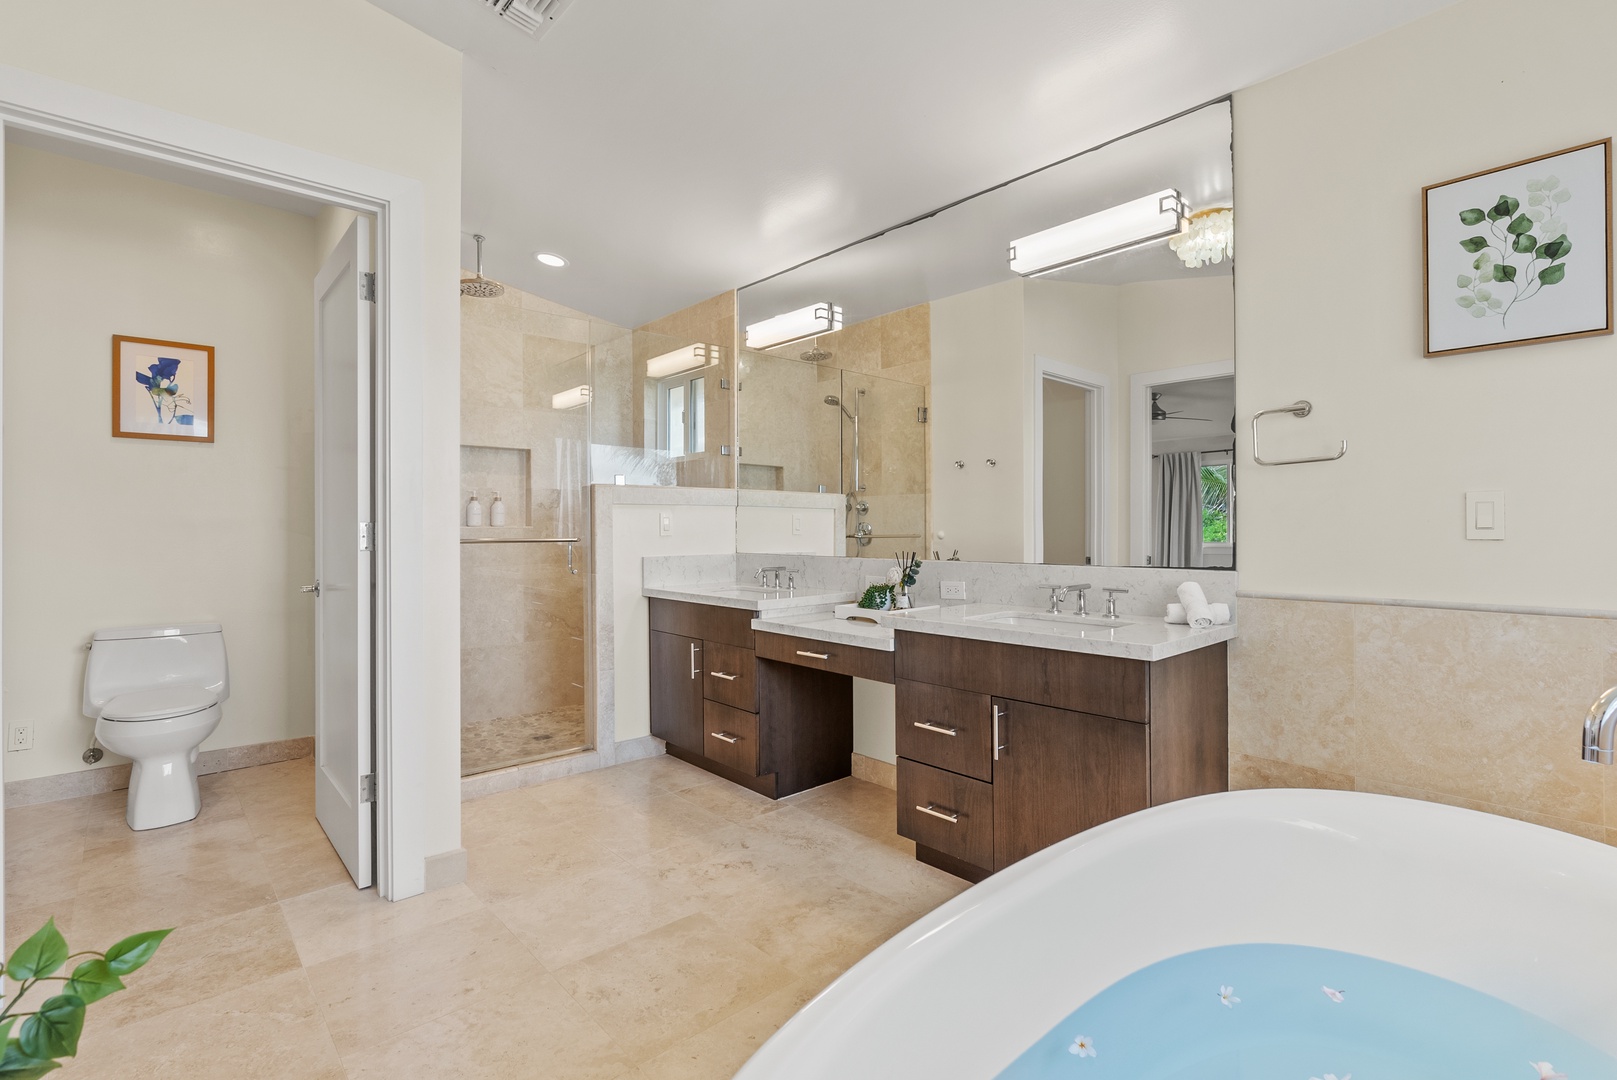 Laie Vacation Rentals, Laie Beachfront Estate - The spa-like ensuite bathroom with a spacious vanity area and a separate shower.